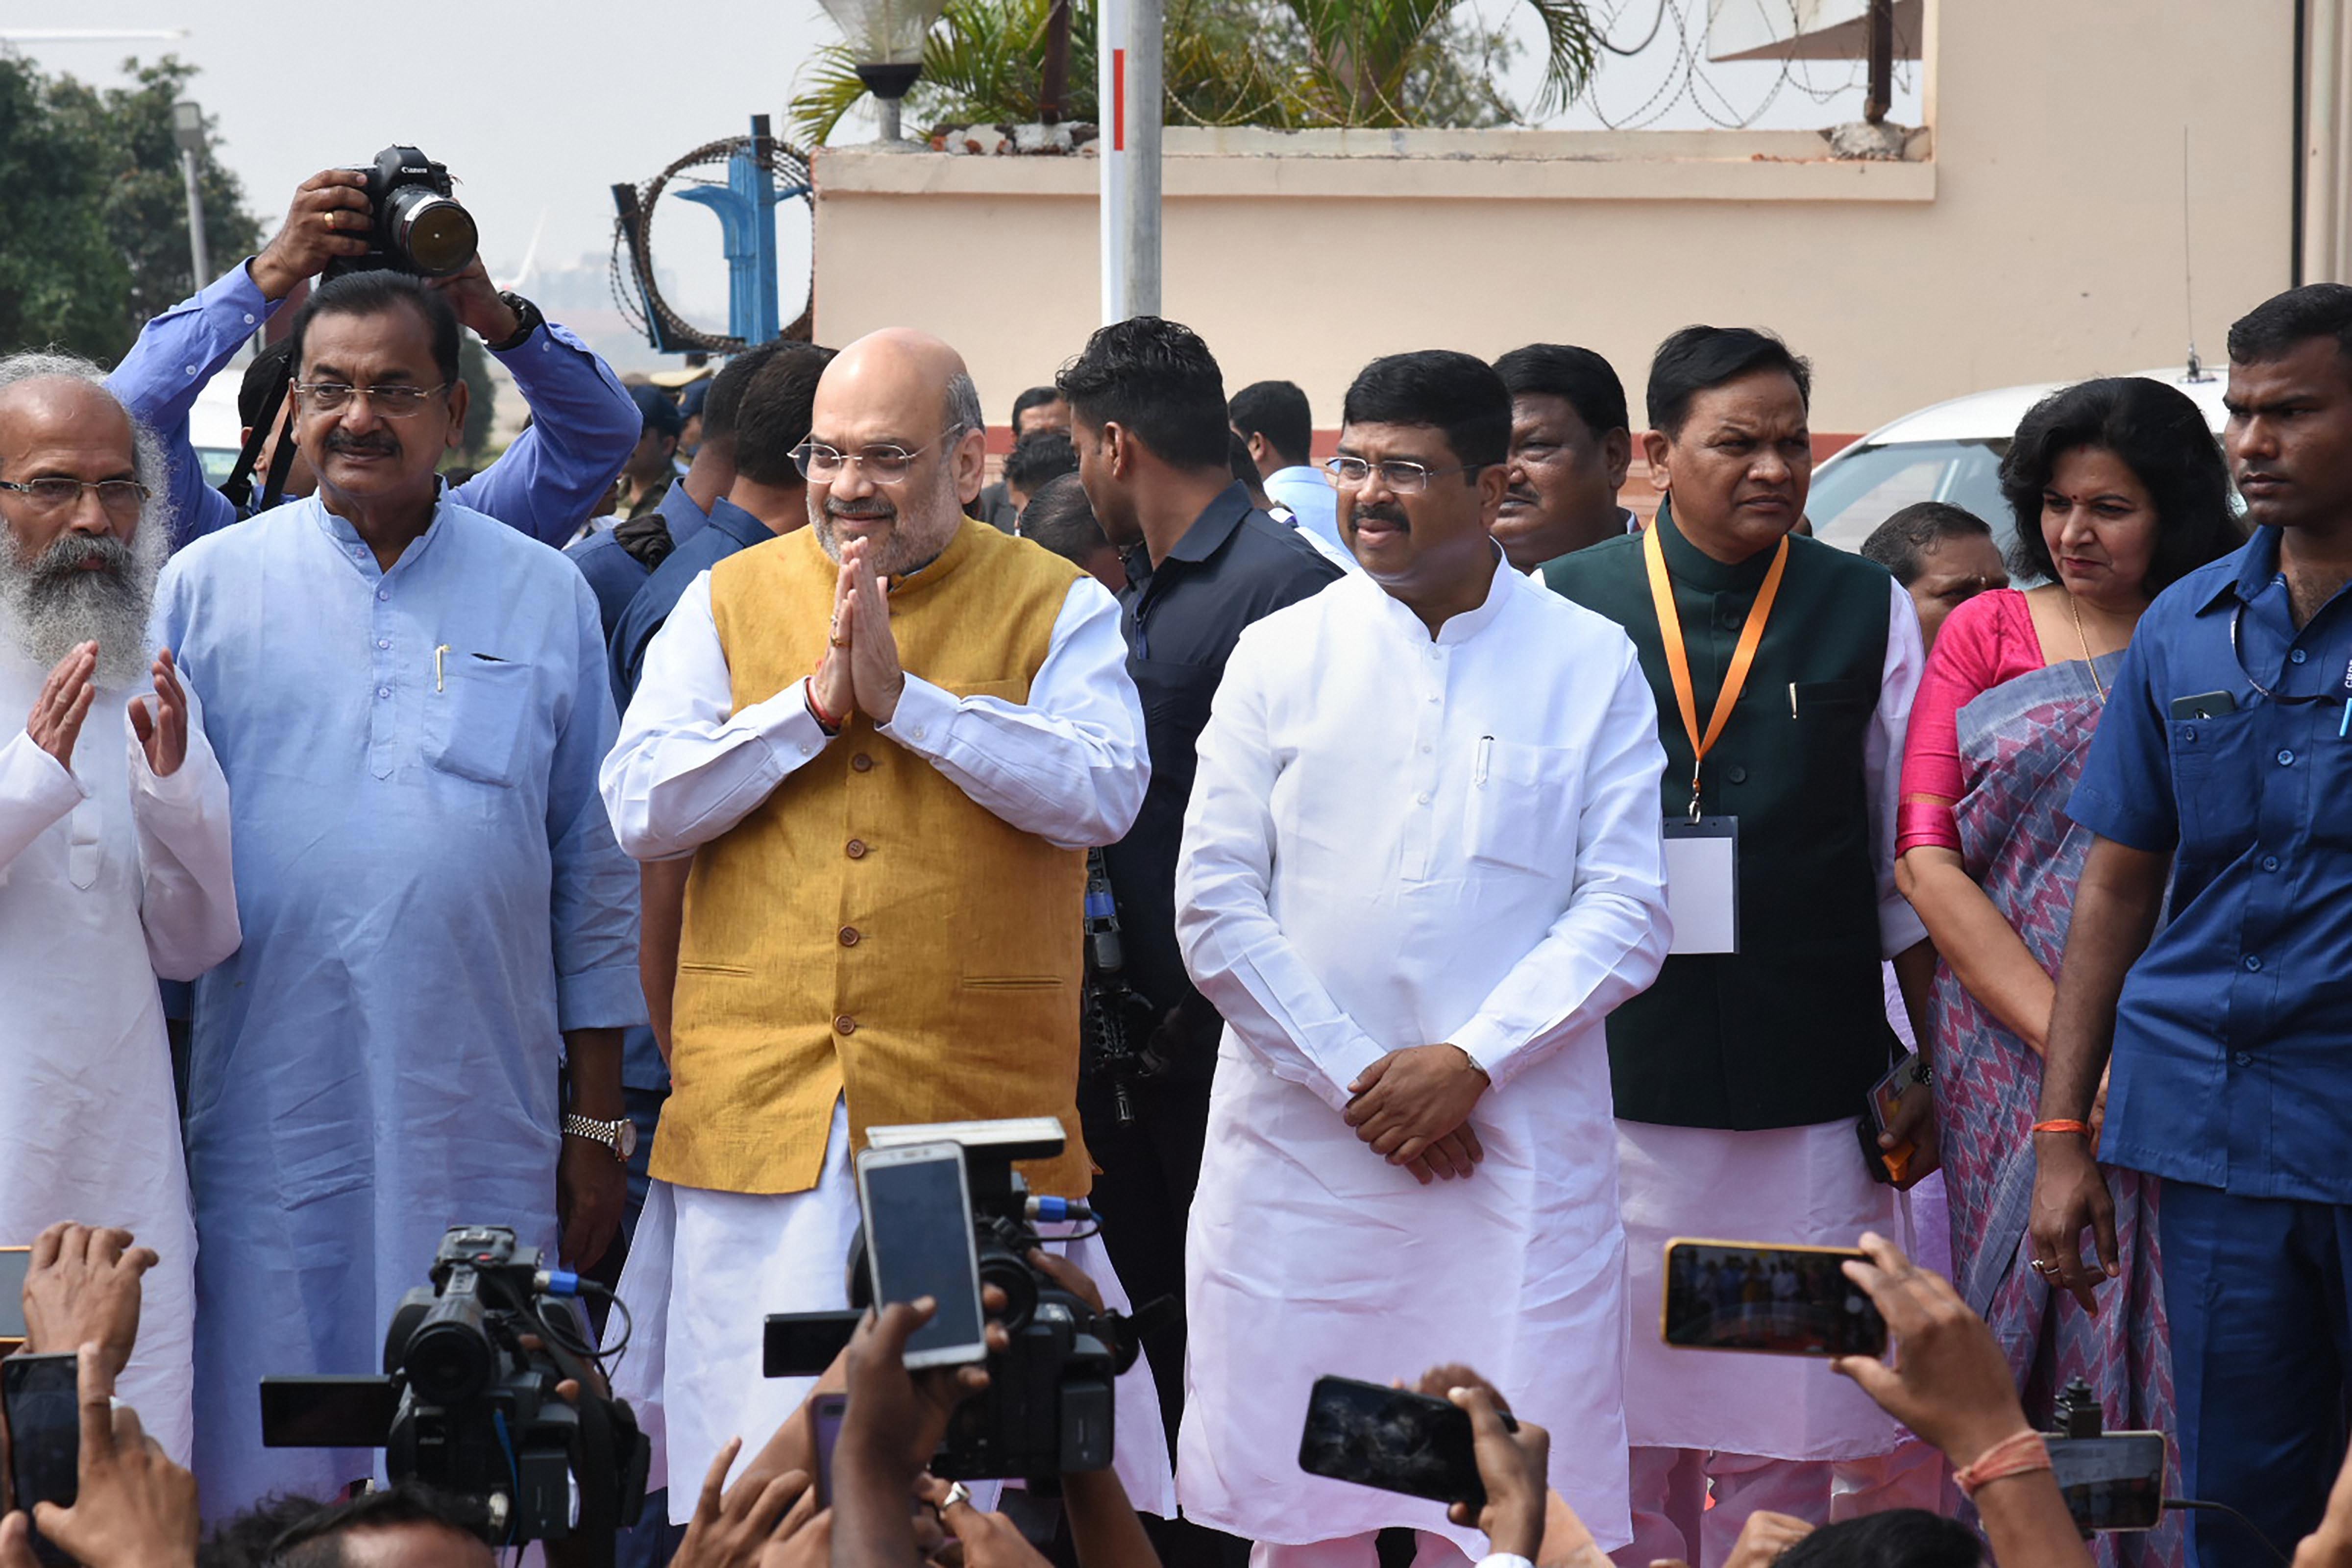 Union home minister Amit Shah is greeted by party workers at airport ahead of his of meeting of the Eastern Zonal Council (EZC) followed by a rally in support of the amended citizenship law, in Bhubaneswar, Friday, February 28, 2020